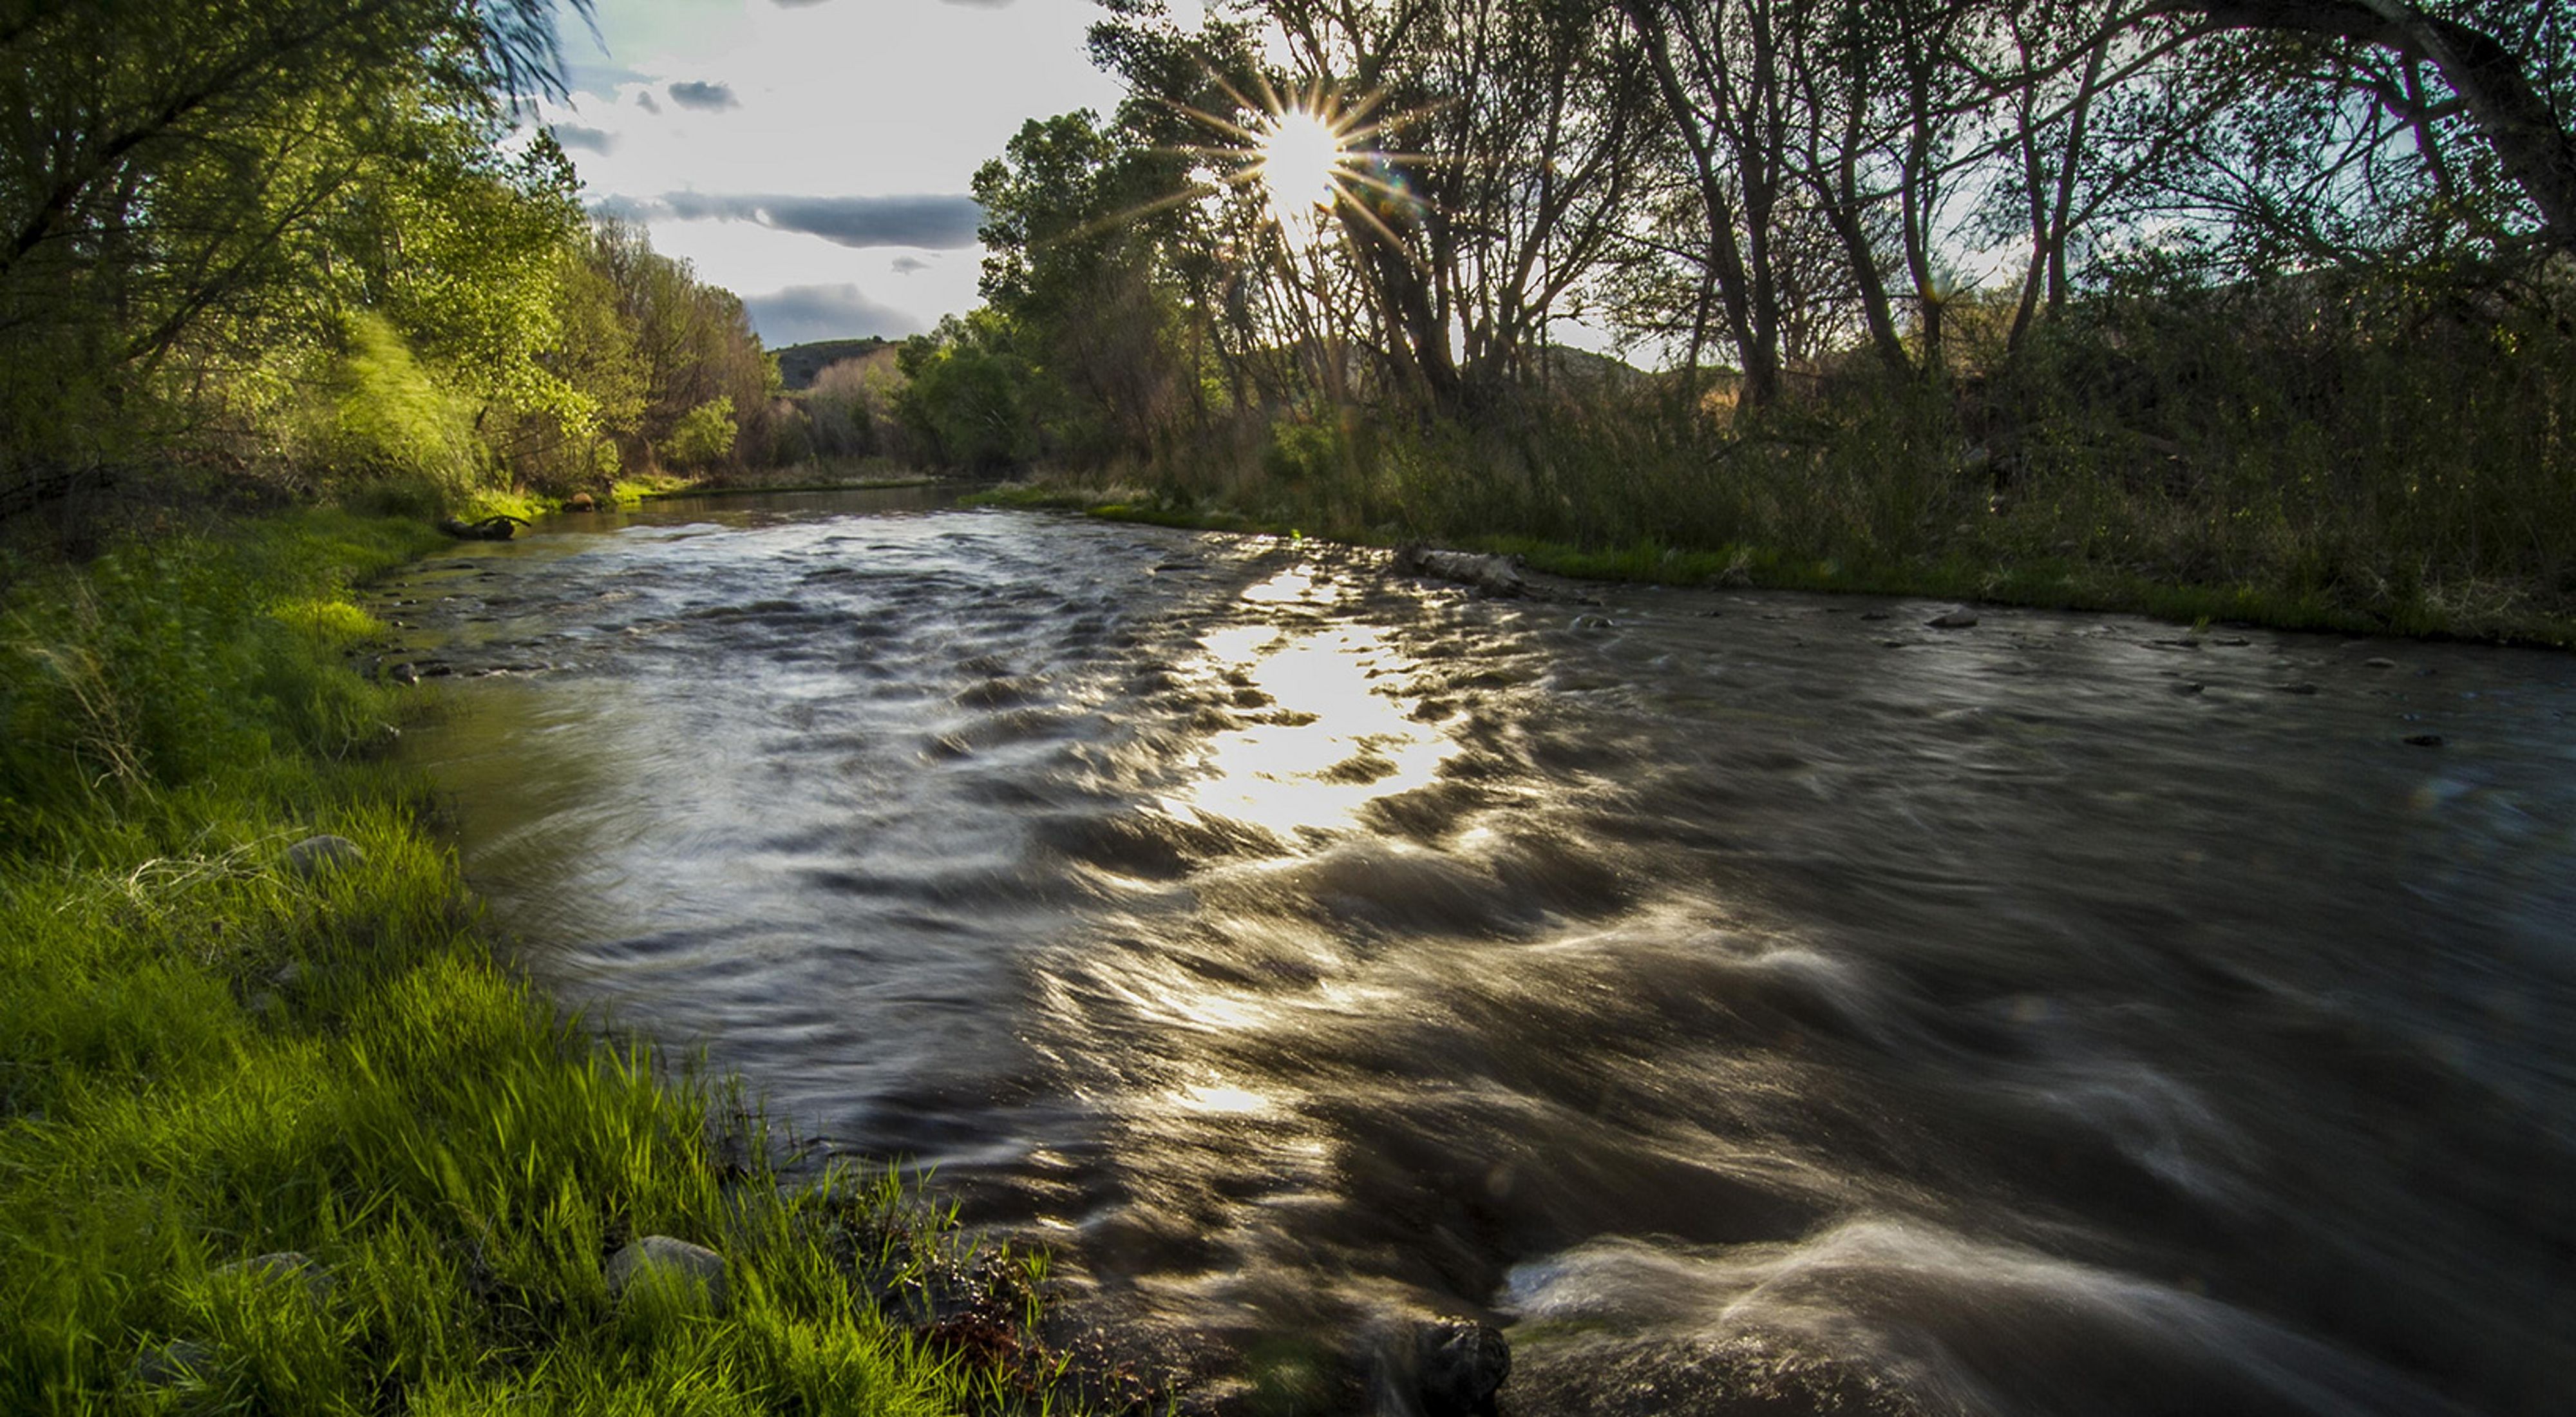 Time-lapse photo of rapidly flowing river lined by trees and backlit by sunshine.